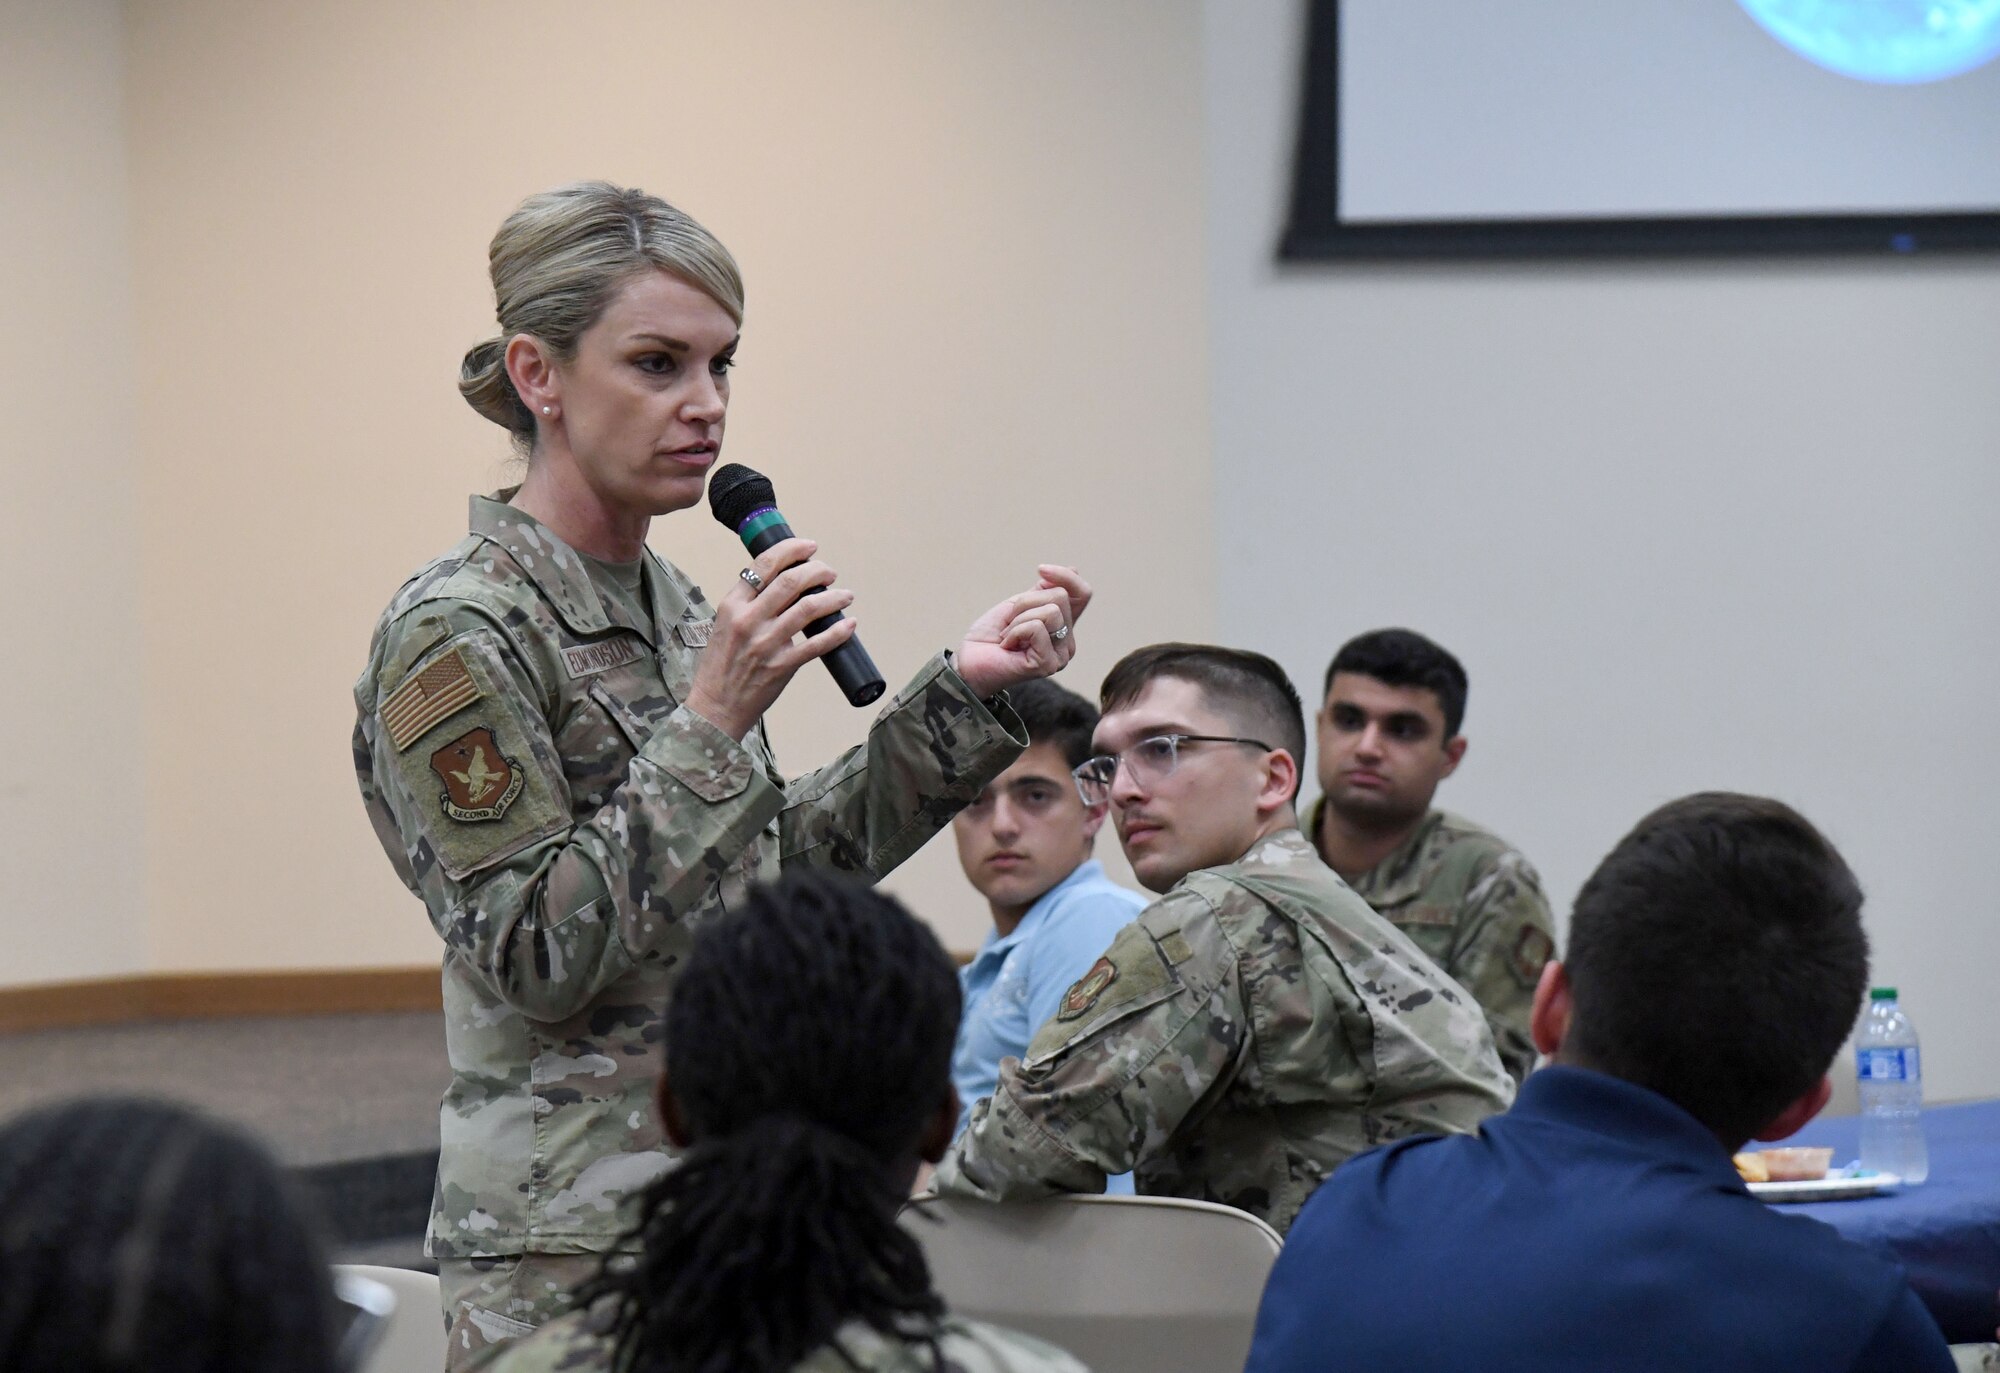 U.S. Air Force Maj. Gen. Michele Edmondson, Second Air Force commander, delivers remarks to Air Force ROTC cadets during Pathways to Blue inside the Roberts Consolidated Aircraft Maintenance Facility at Keesler Air Force Base, Mississippi, March 31, 2023.